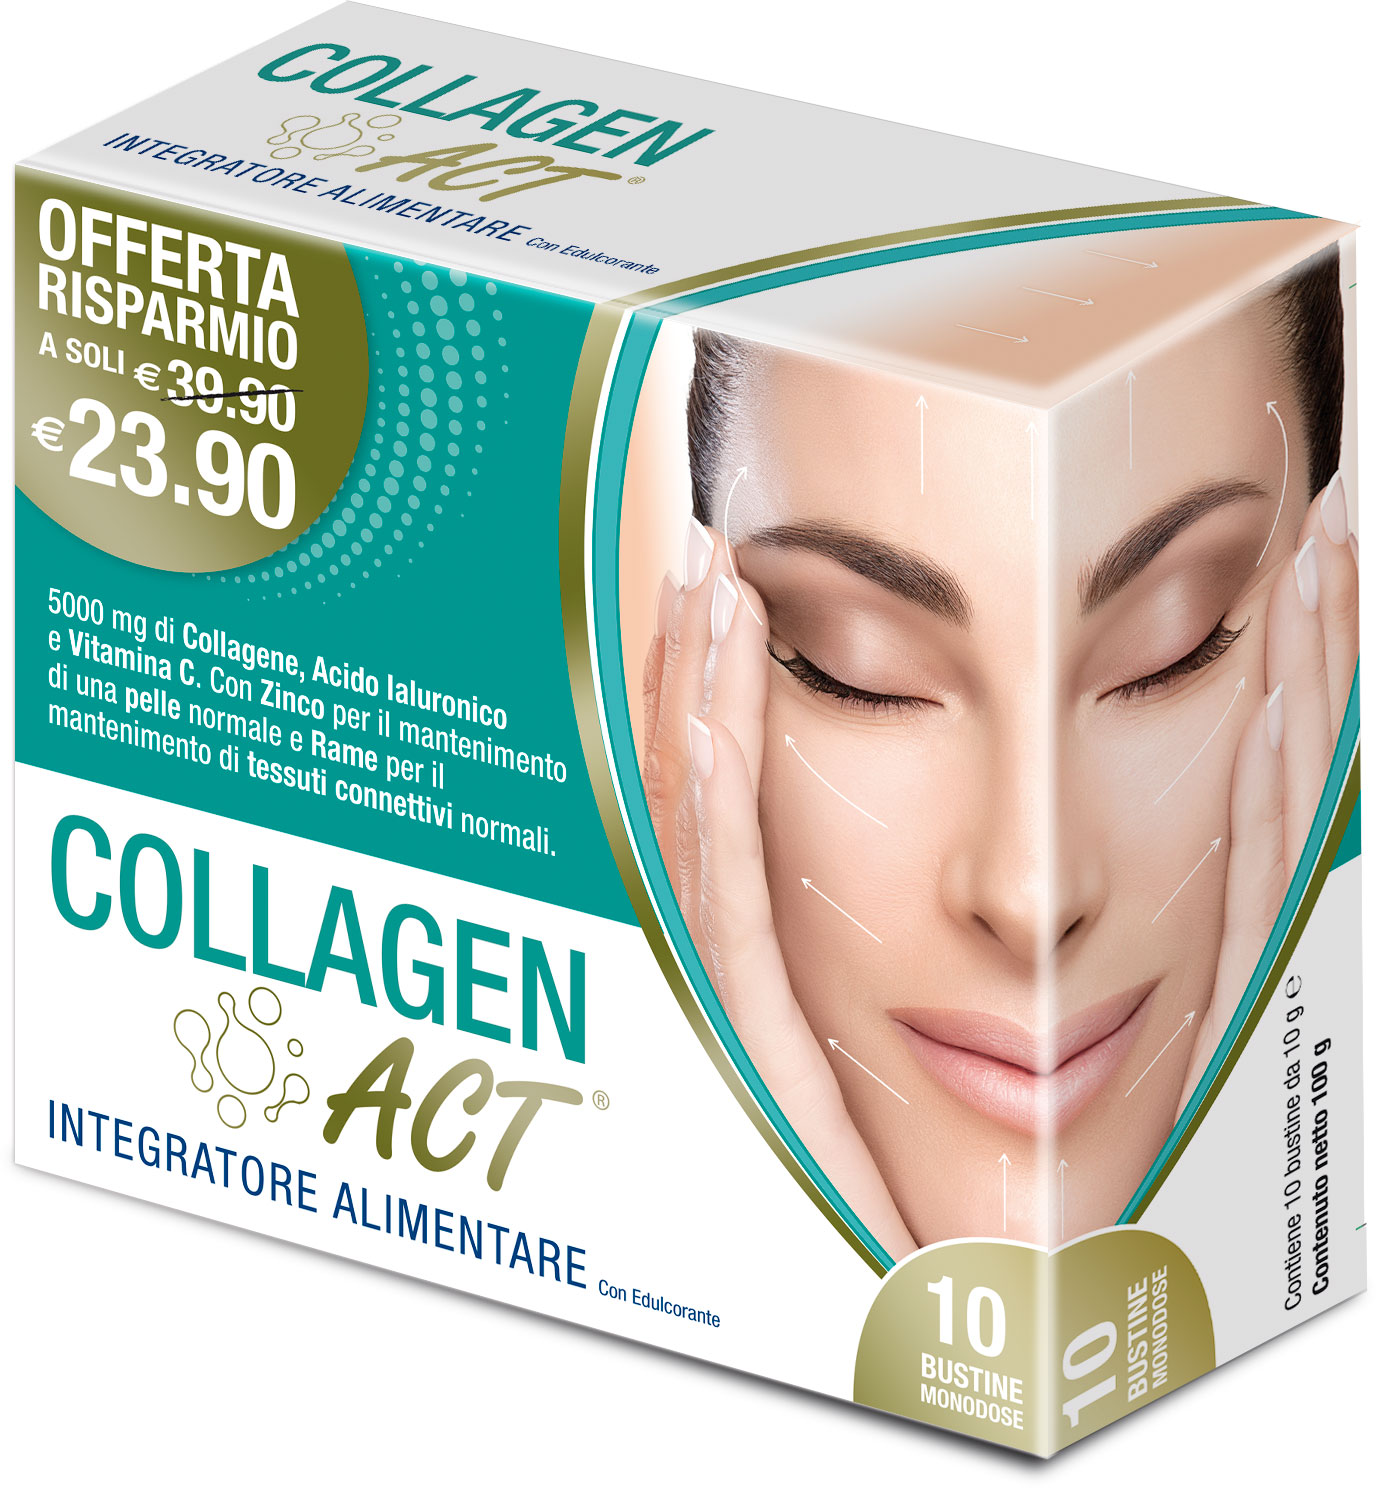 Image of Collagen Act Integratore Alimentare 10 Bustine